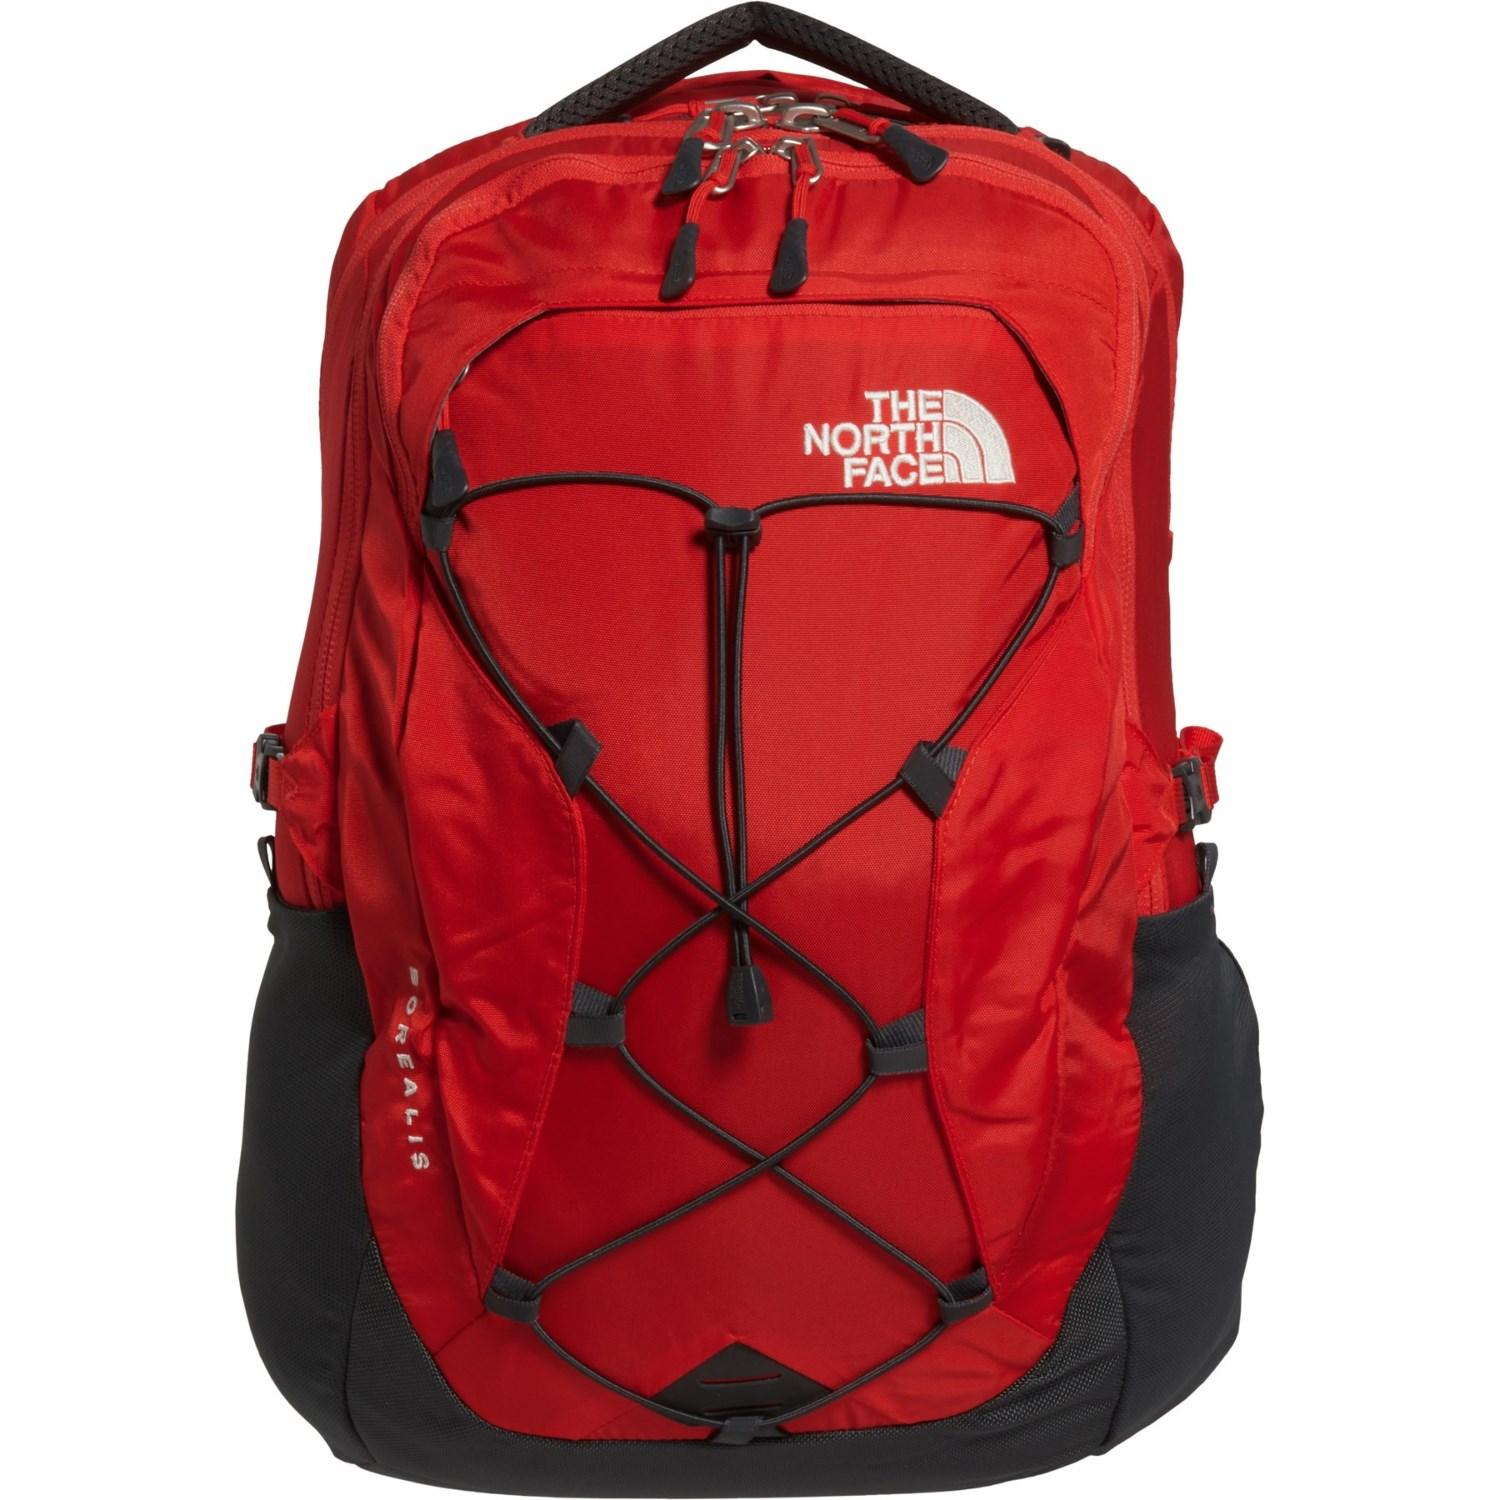 The North Face Fleece Borealis 27l Backpack in Red - Lyst